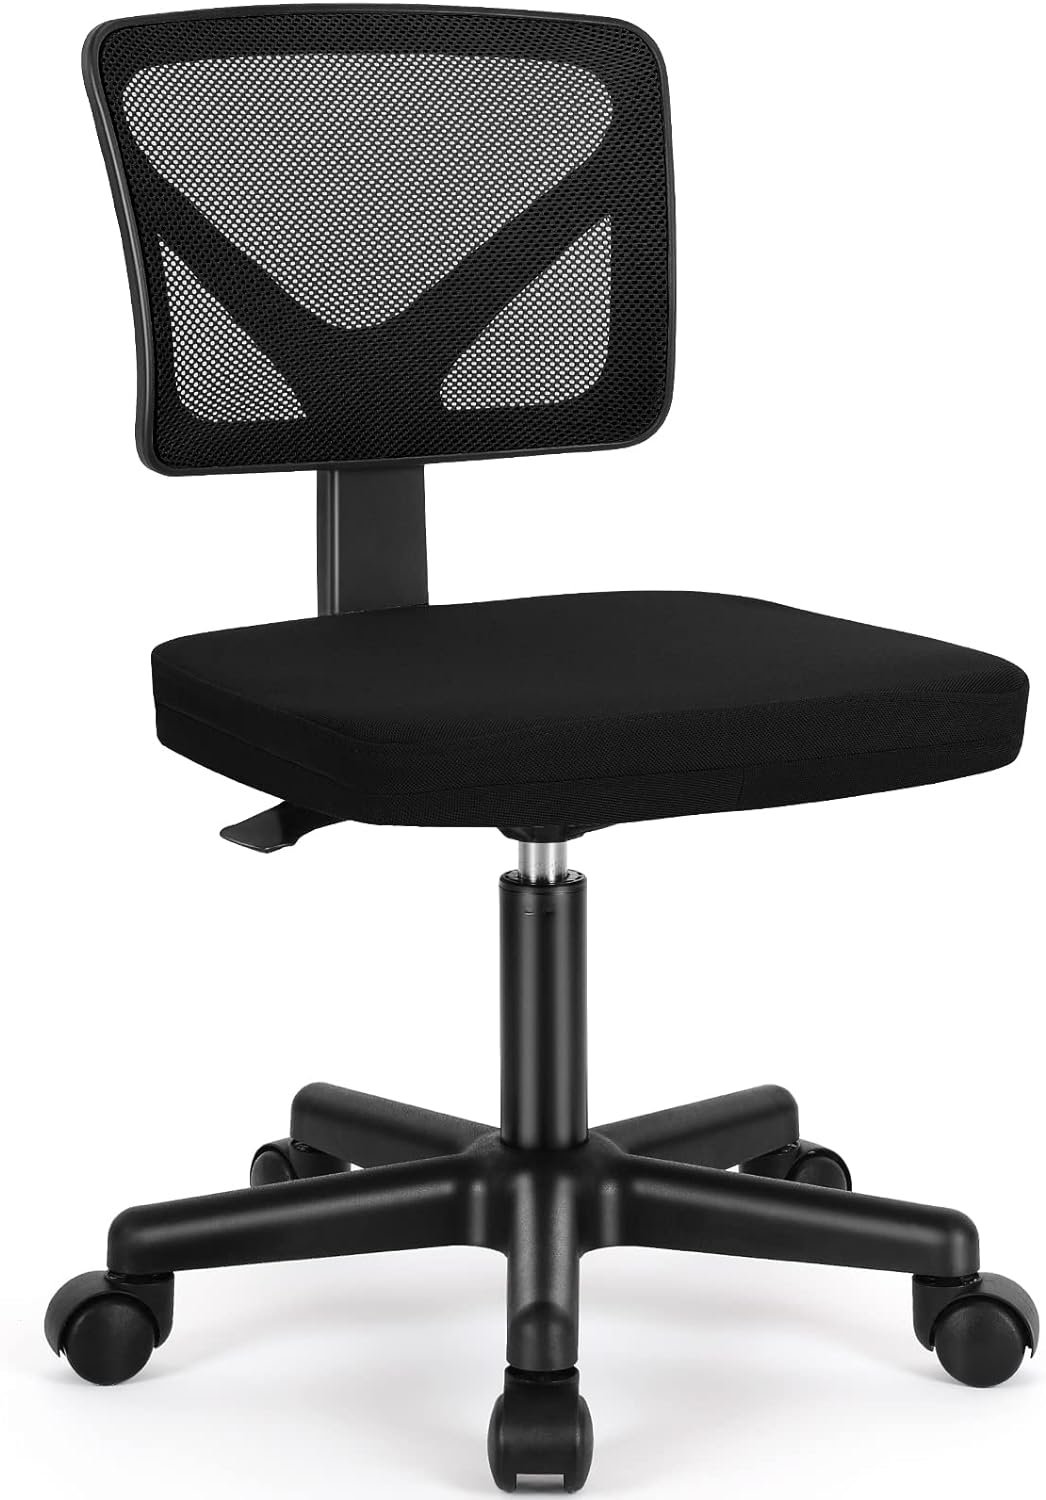 Armless Desk Chair Review